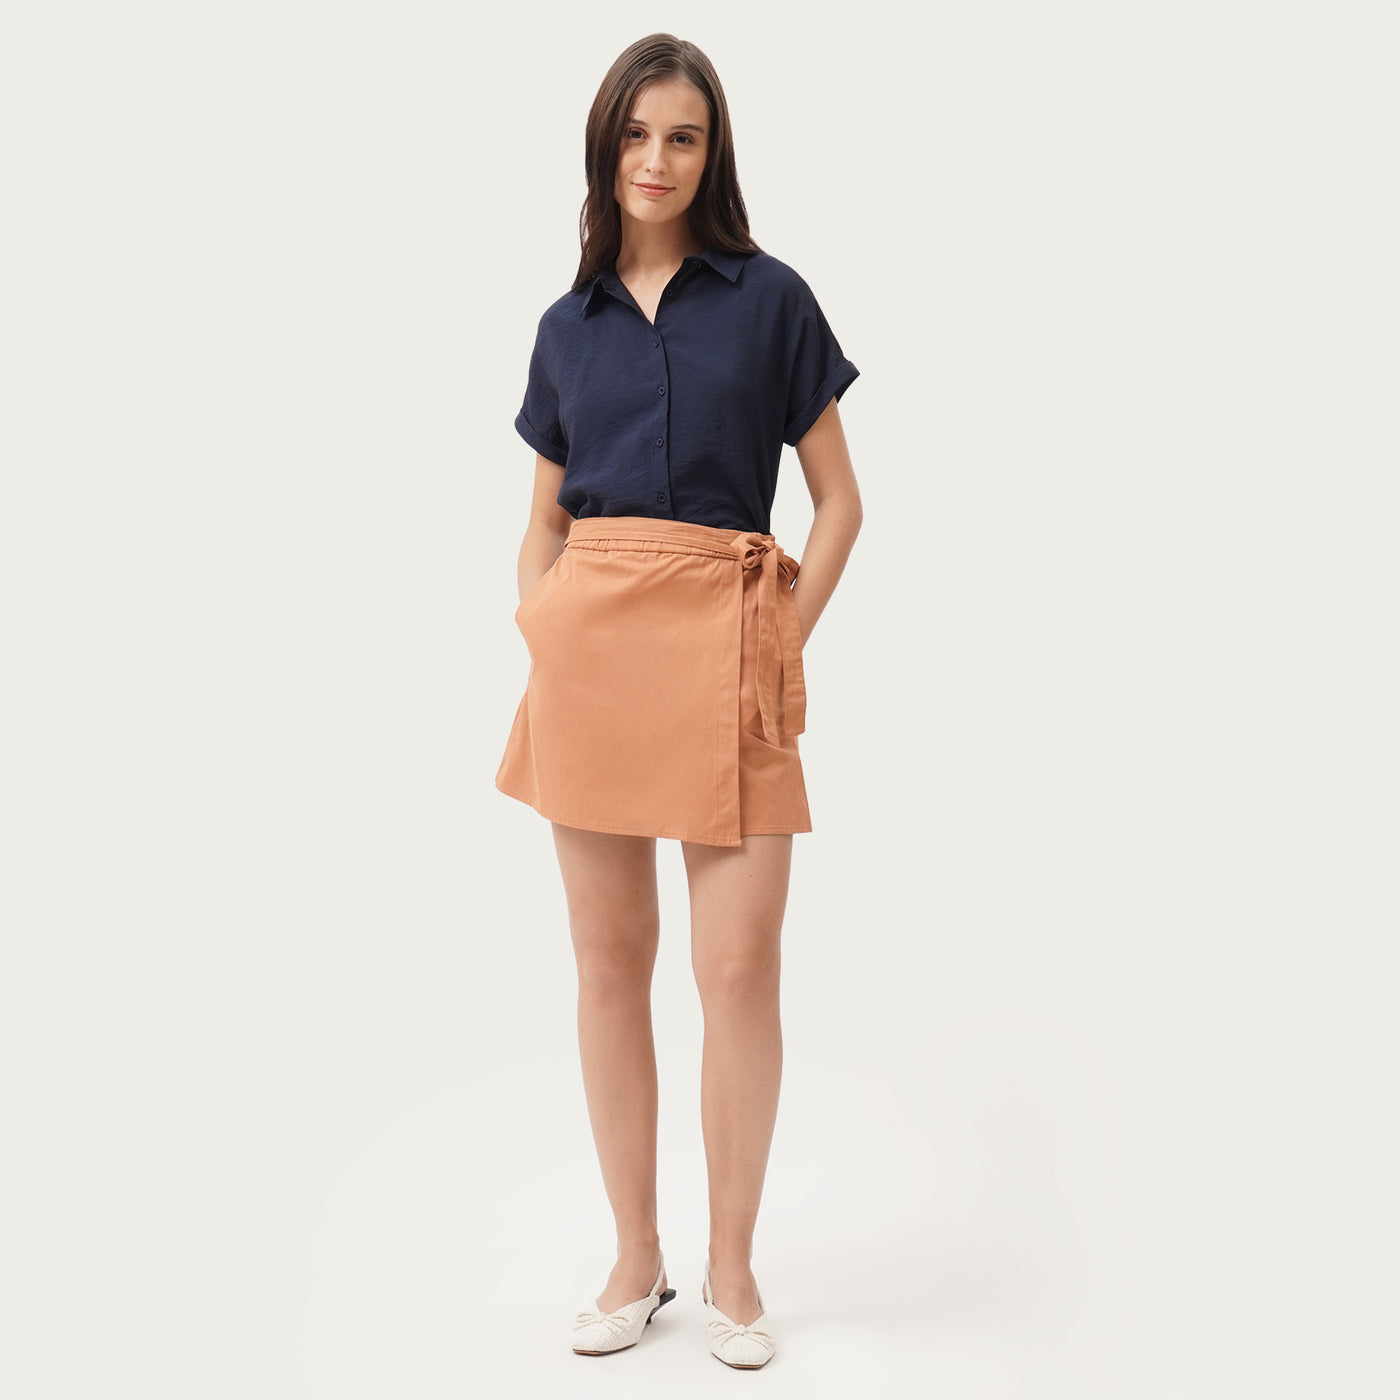 Overlap Skirt with Tie Detail